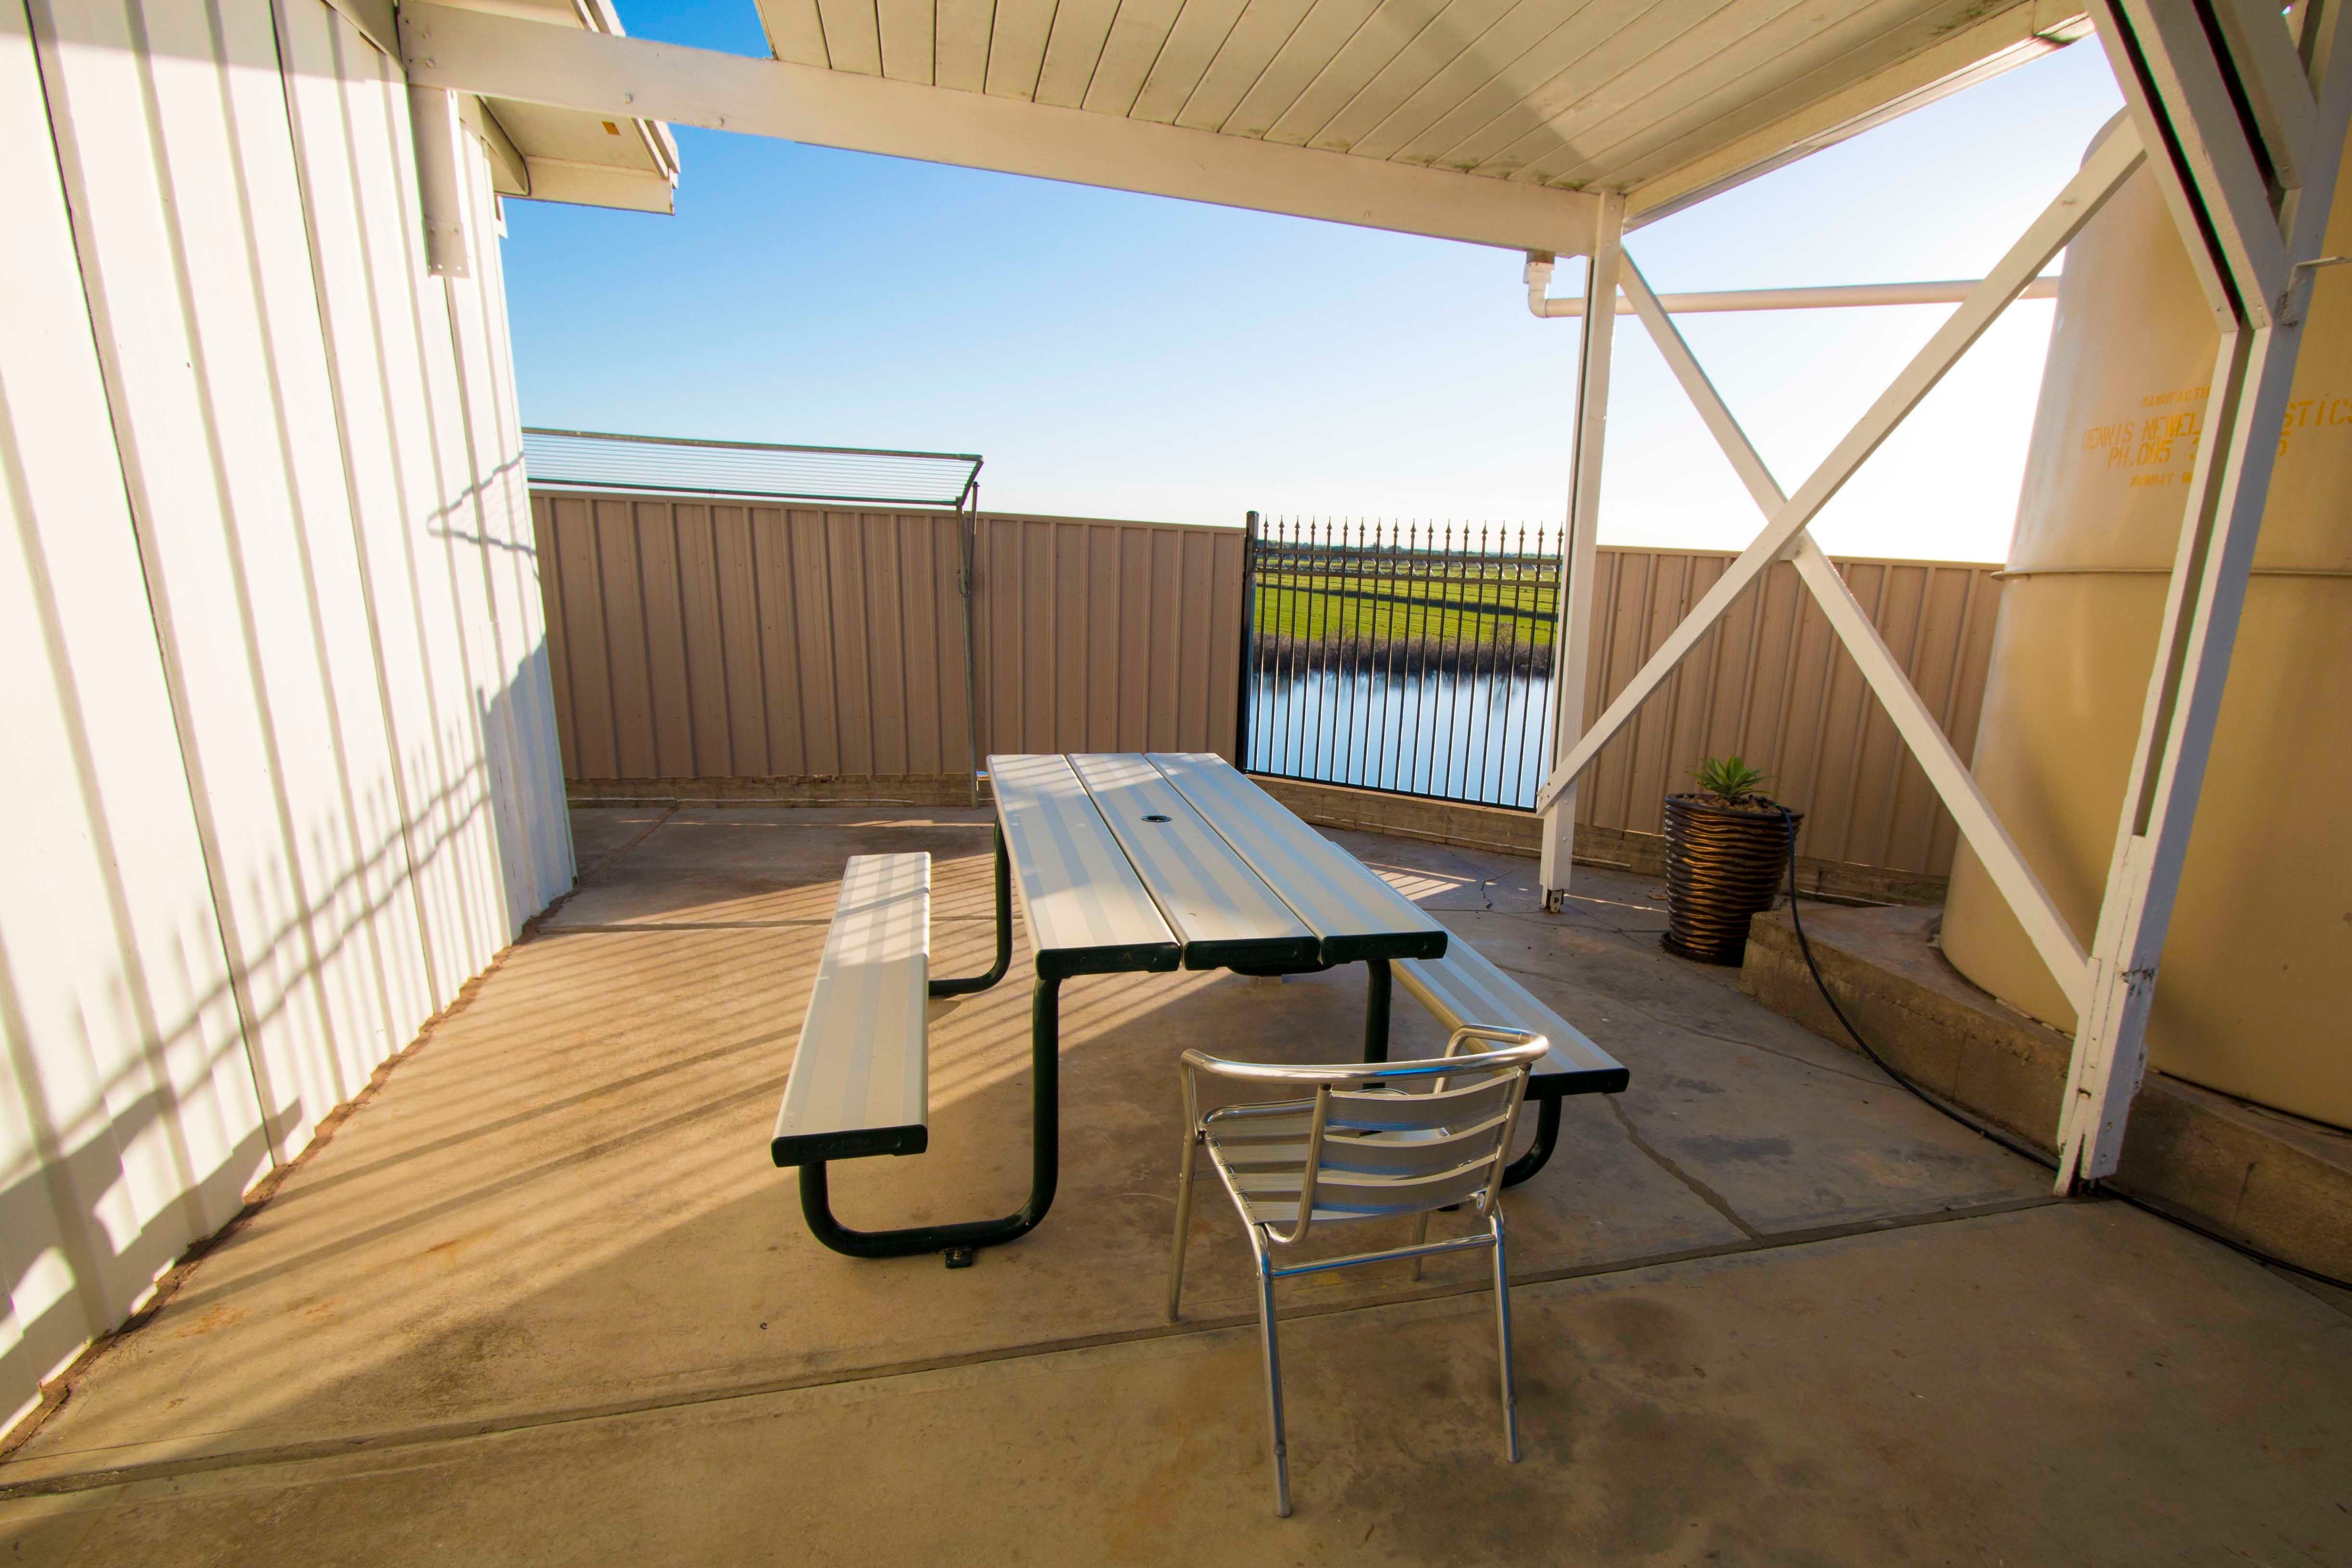 River View Rest - Coogee Beach Accommodation